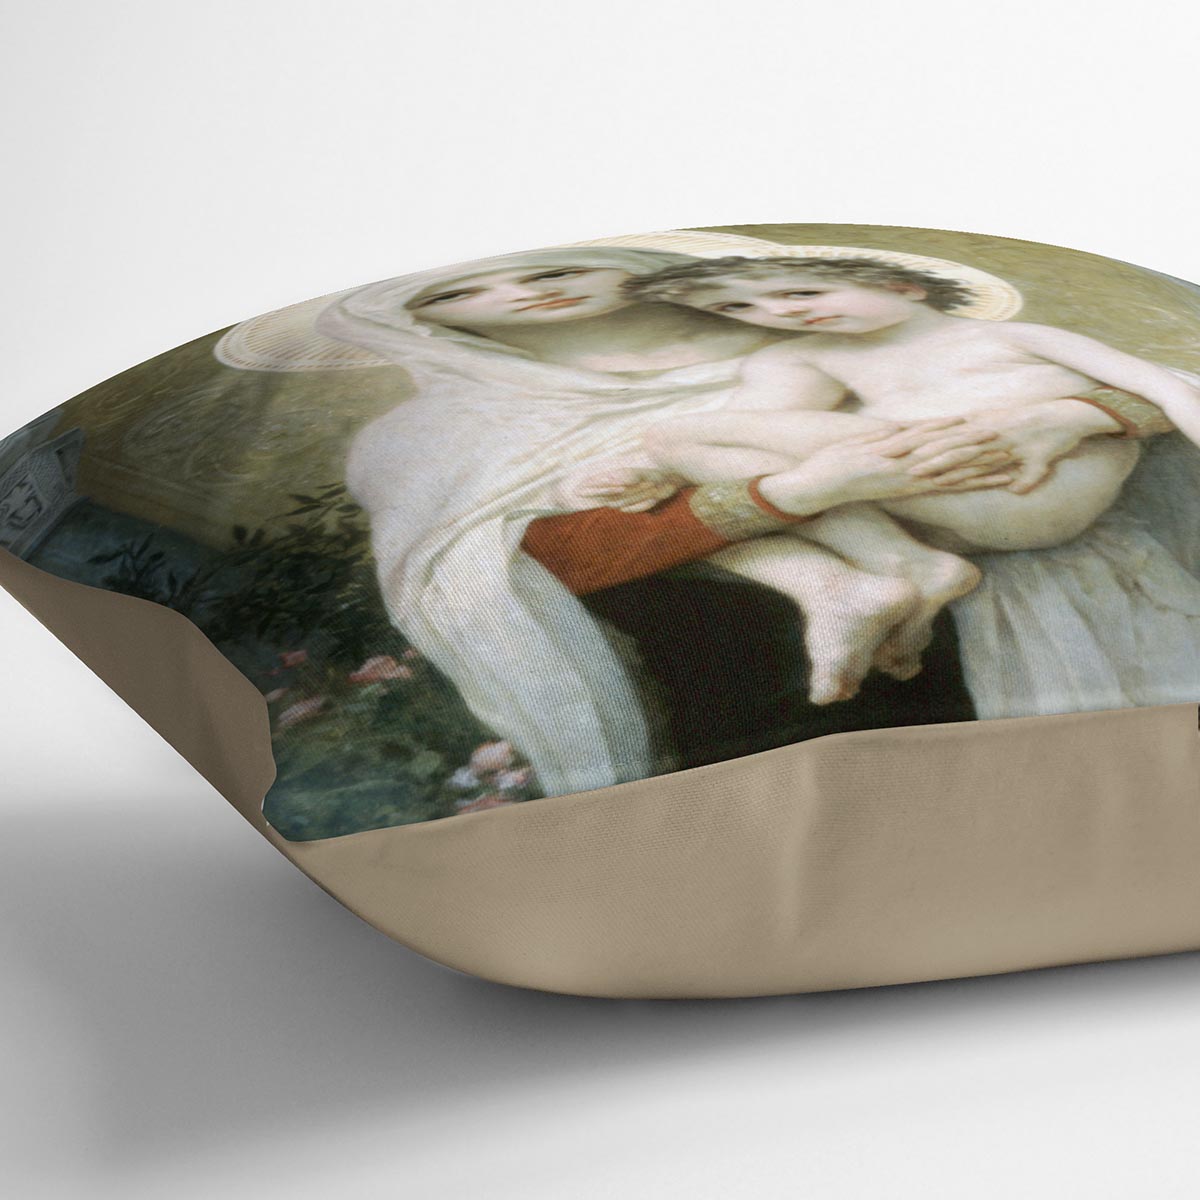 The Madonna of the Roses By Bouguereau Cushion